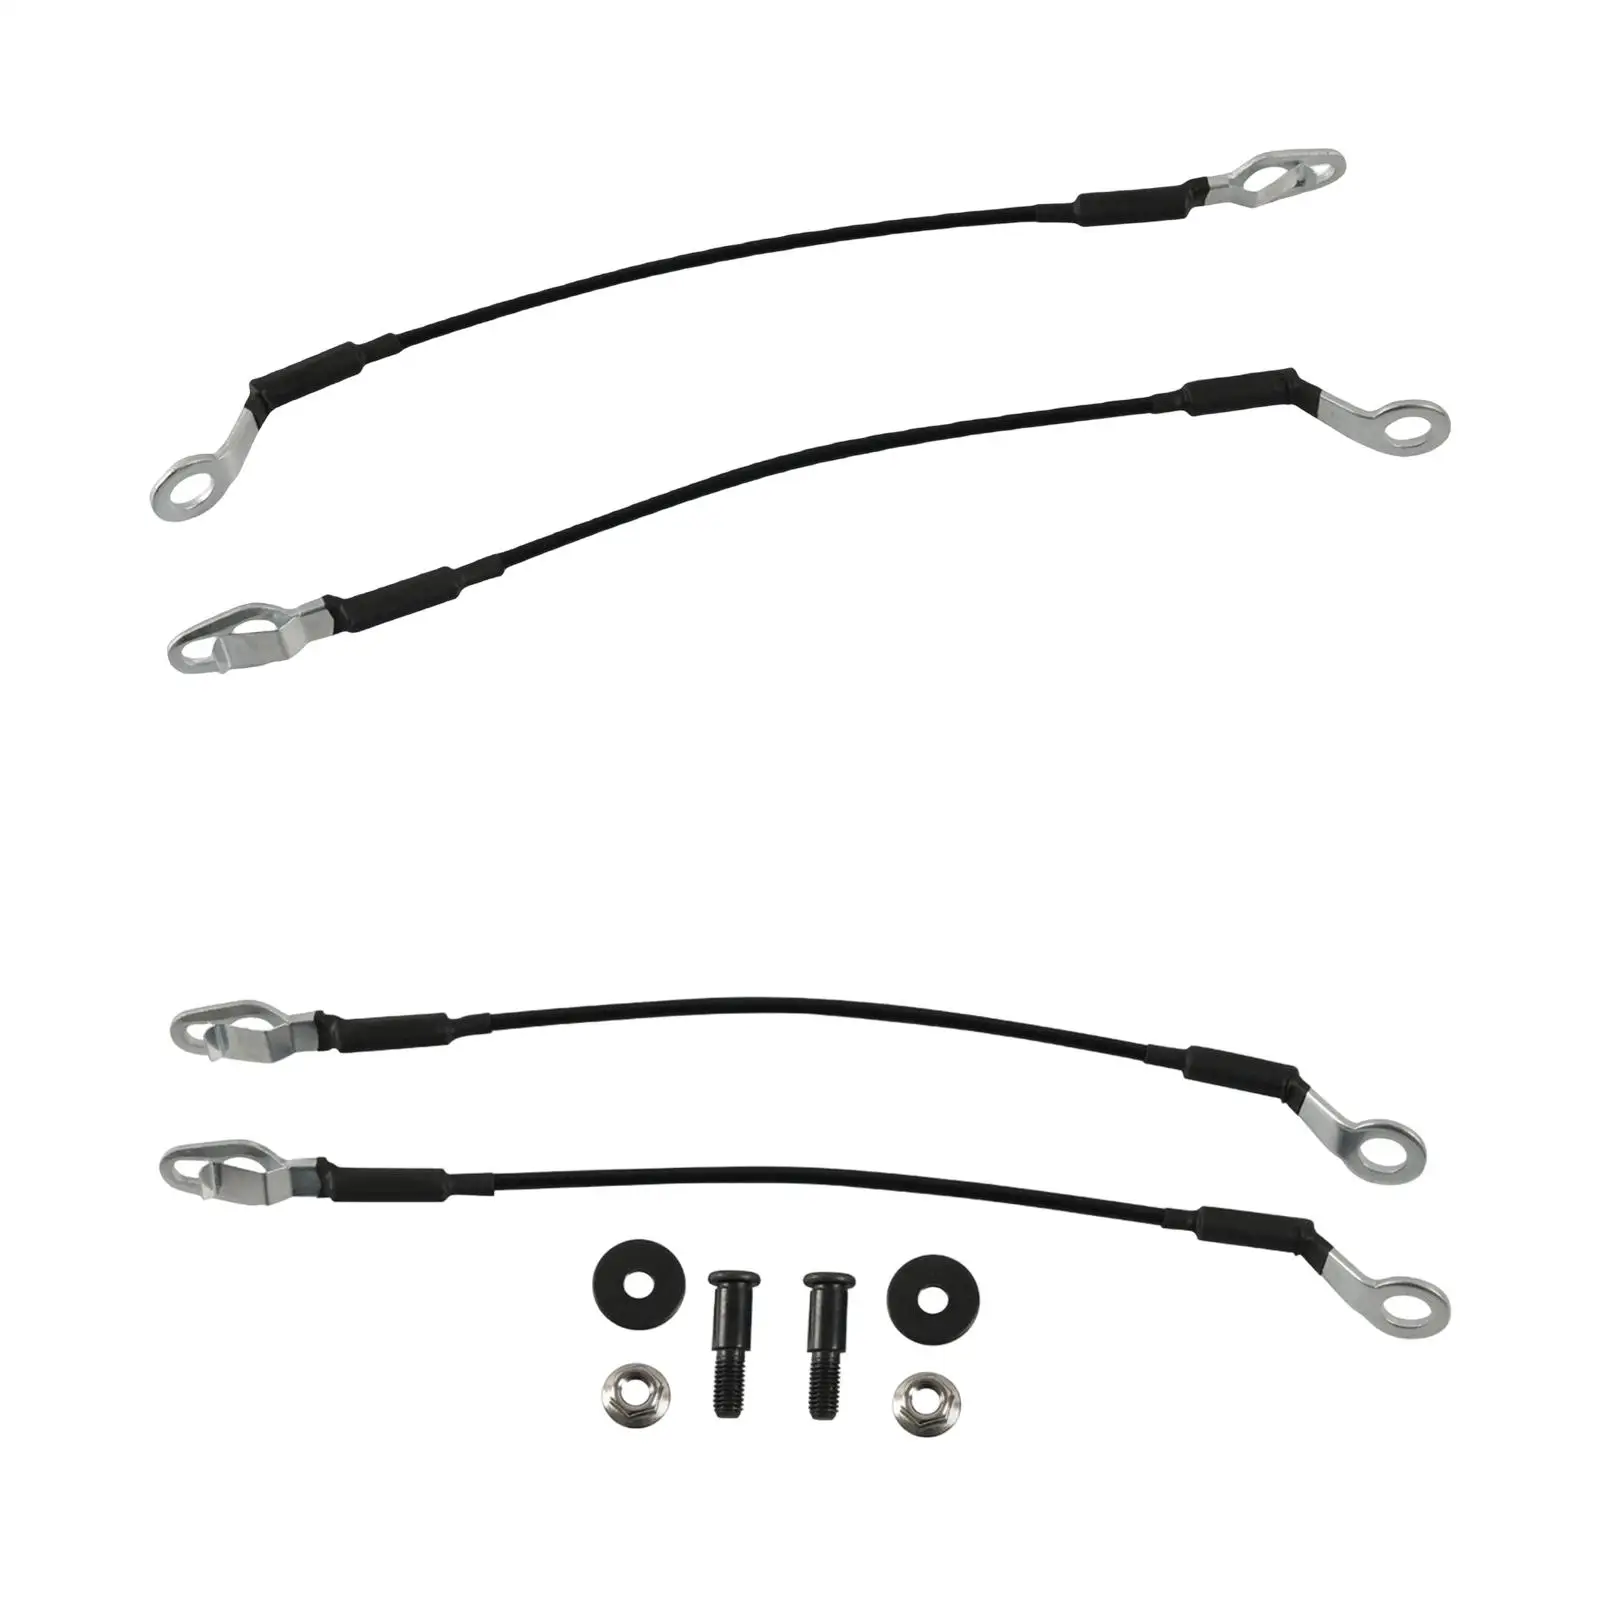 Car Tailgate Tail Gate Rear Cable 88980509 889805 for SUV Pickup Truck professional high quality Spare Parts Replacement